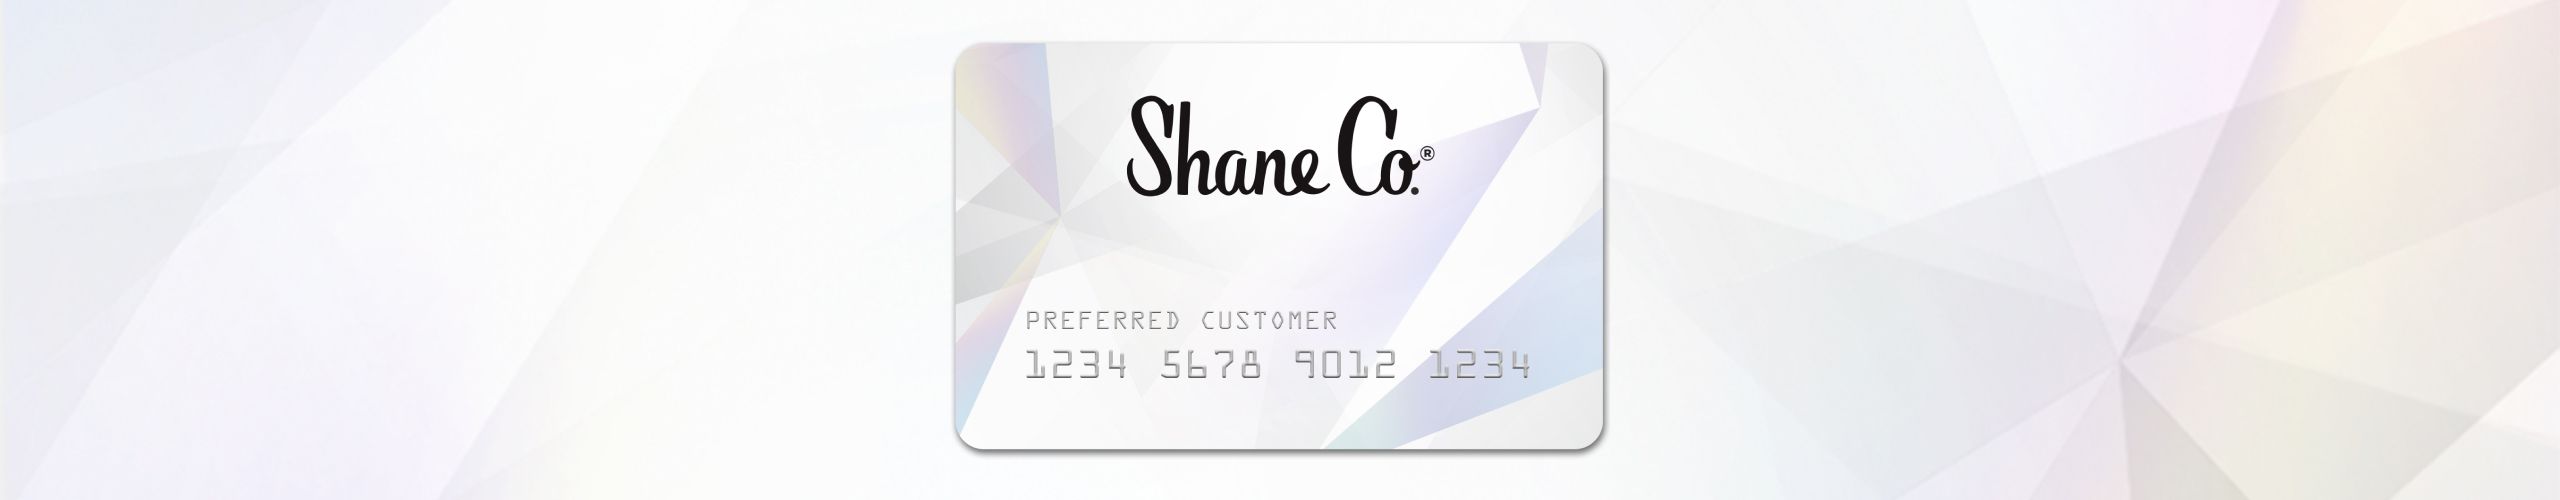 An image of the Shane Co credit card